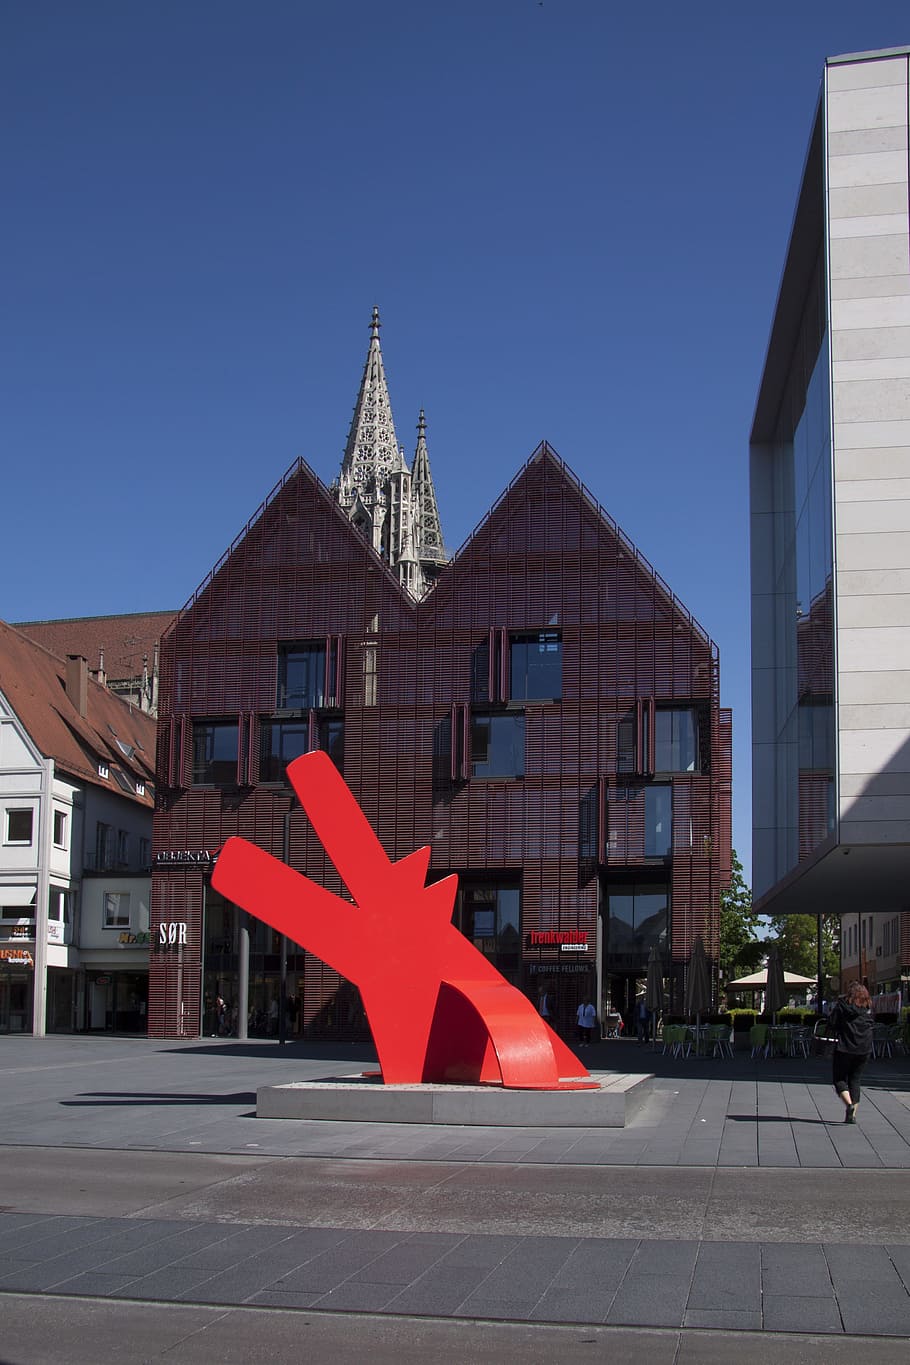 Sculpture, Keith Haring, Red Dog, artwork, ulm, architecture